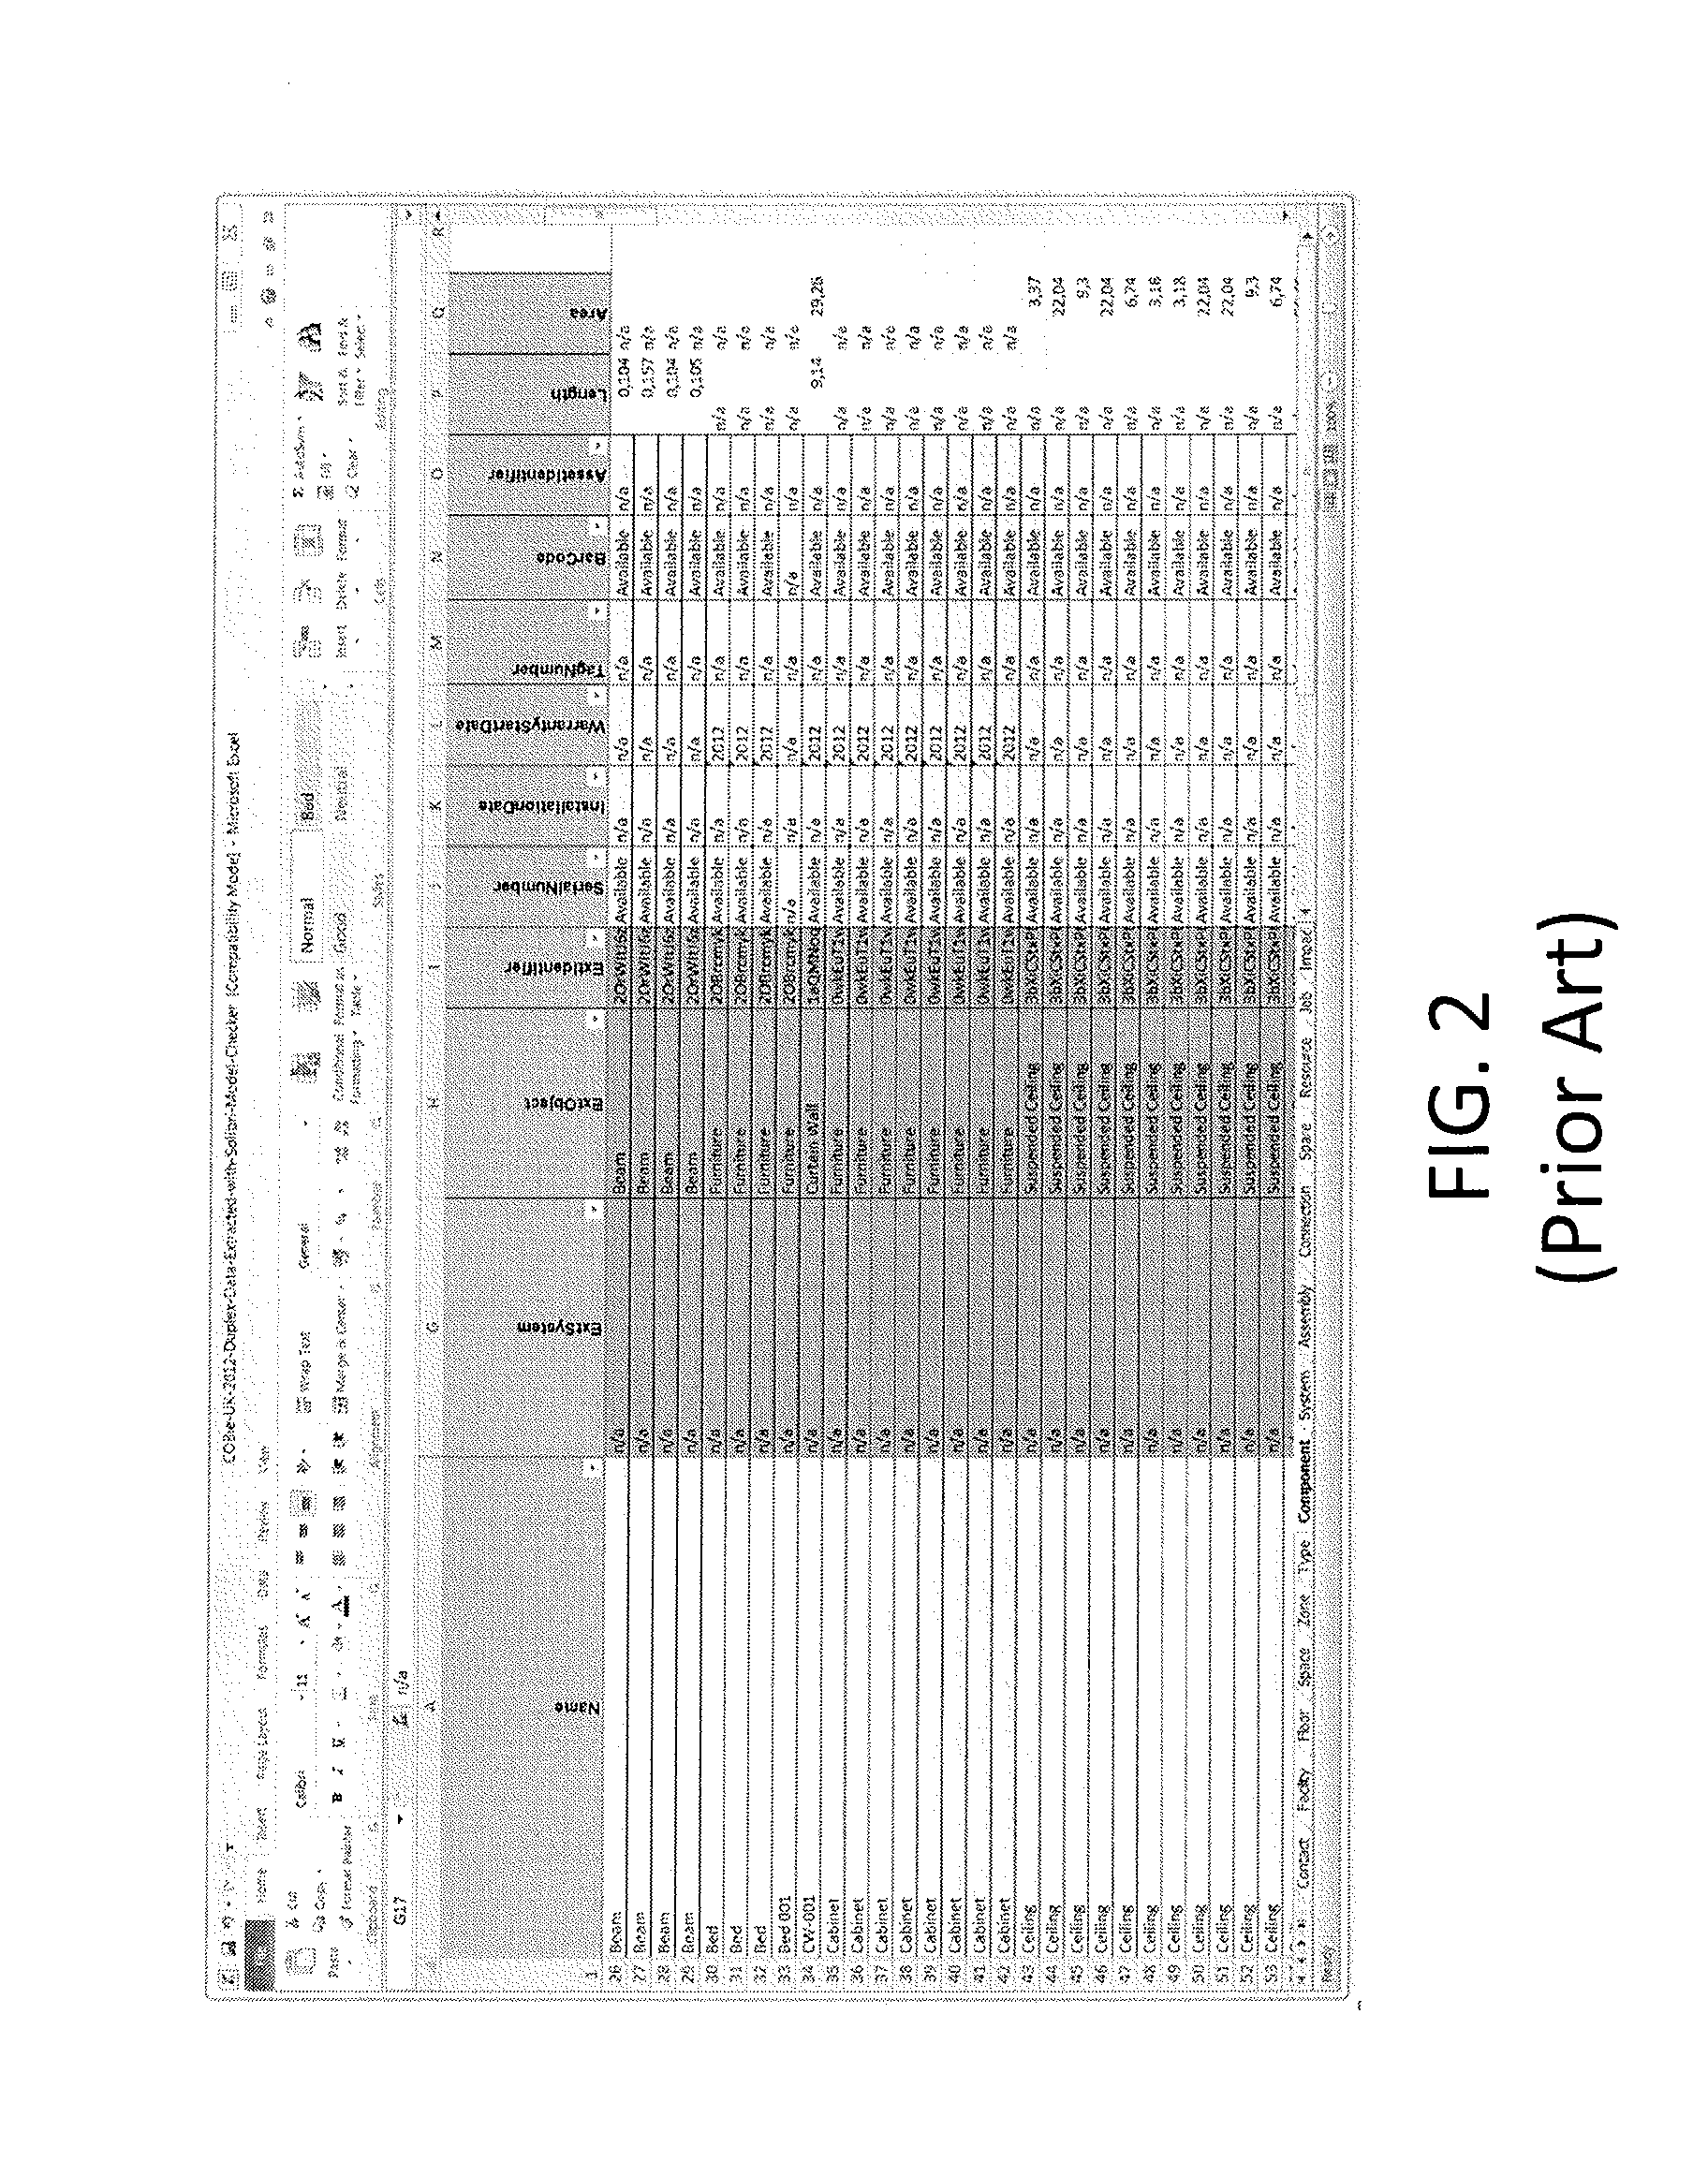 System and Method for Express Spreadsheet Visualization for Building Information Modeling